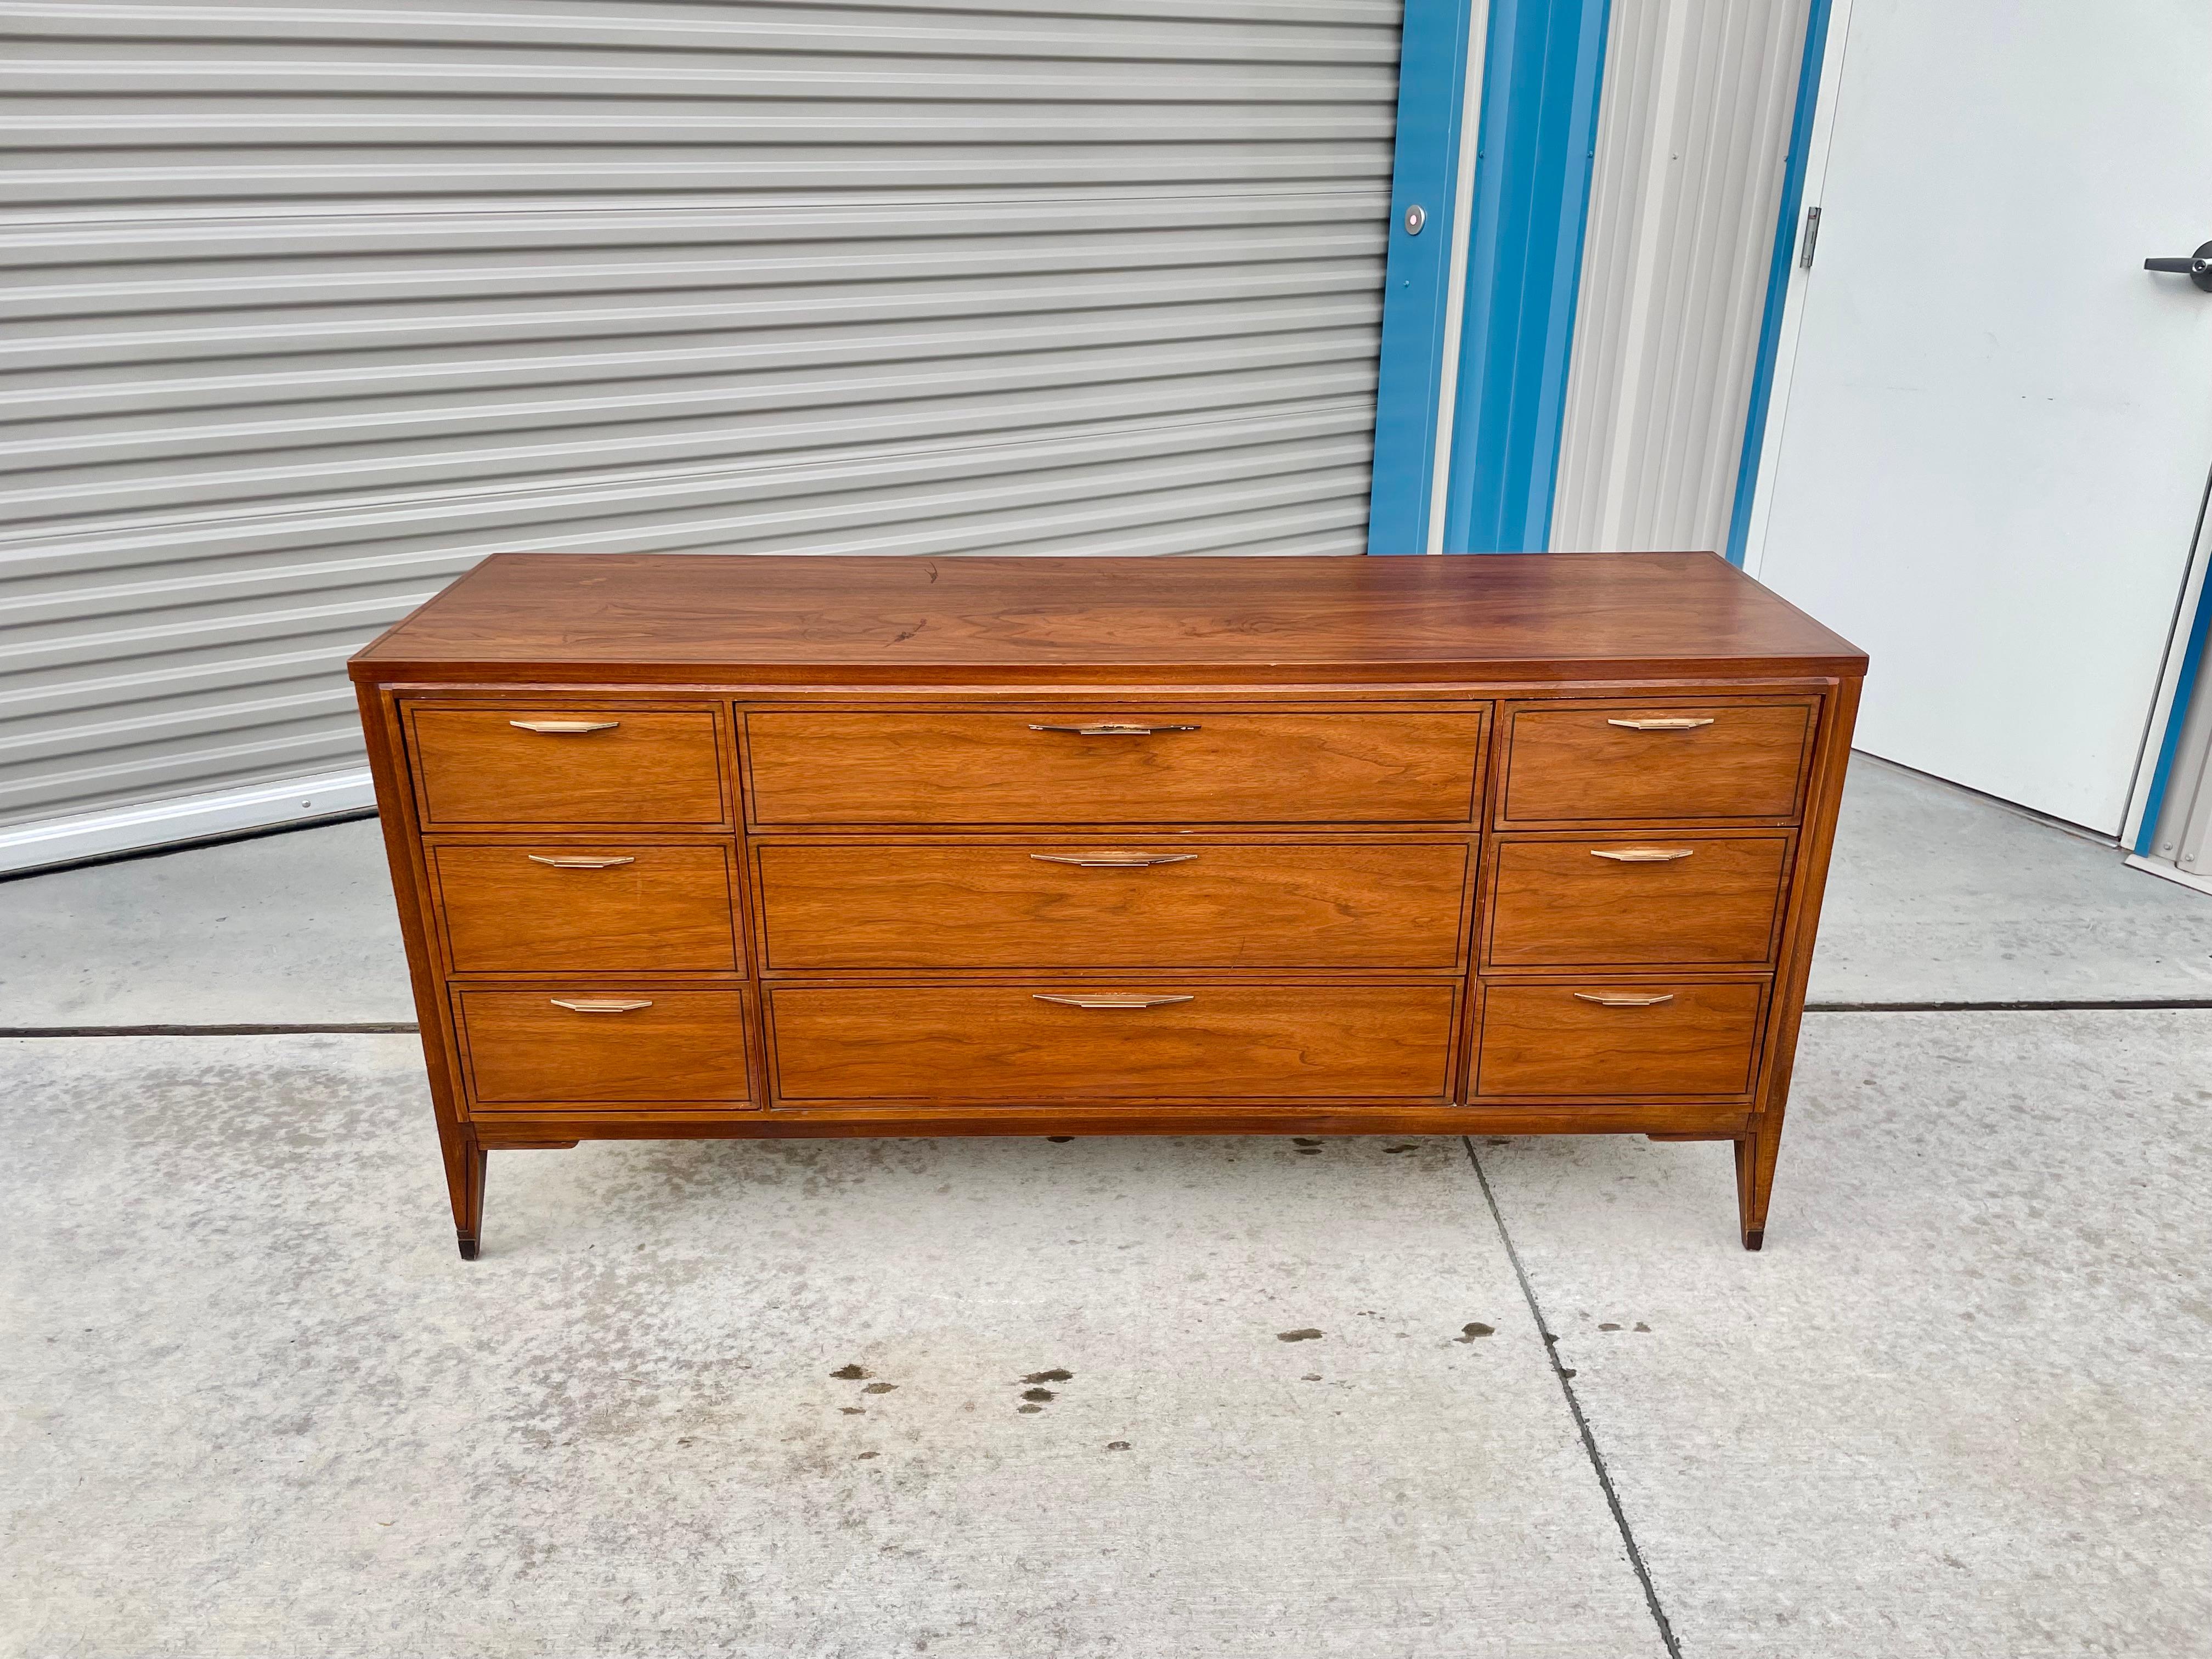 Vintage walnut dresser designed and manufactured by Kent Coffey Tempo in the united states circa 1960s. This beautiful mid-century dresser features a walnut frame giving it an excellent color tone and design. The dresser also features nine pull-out